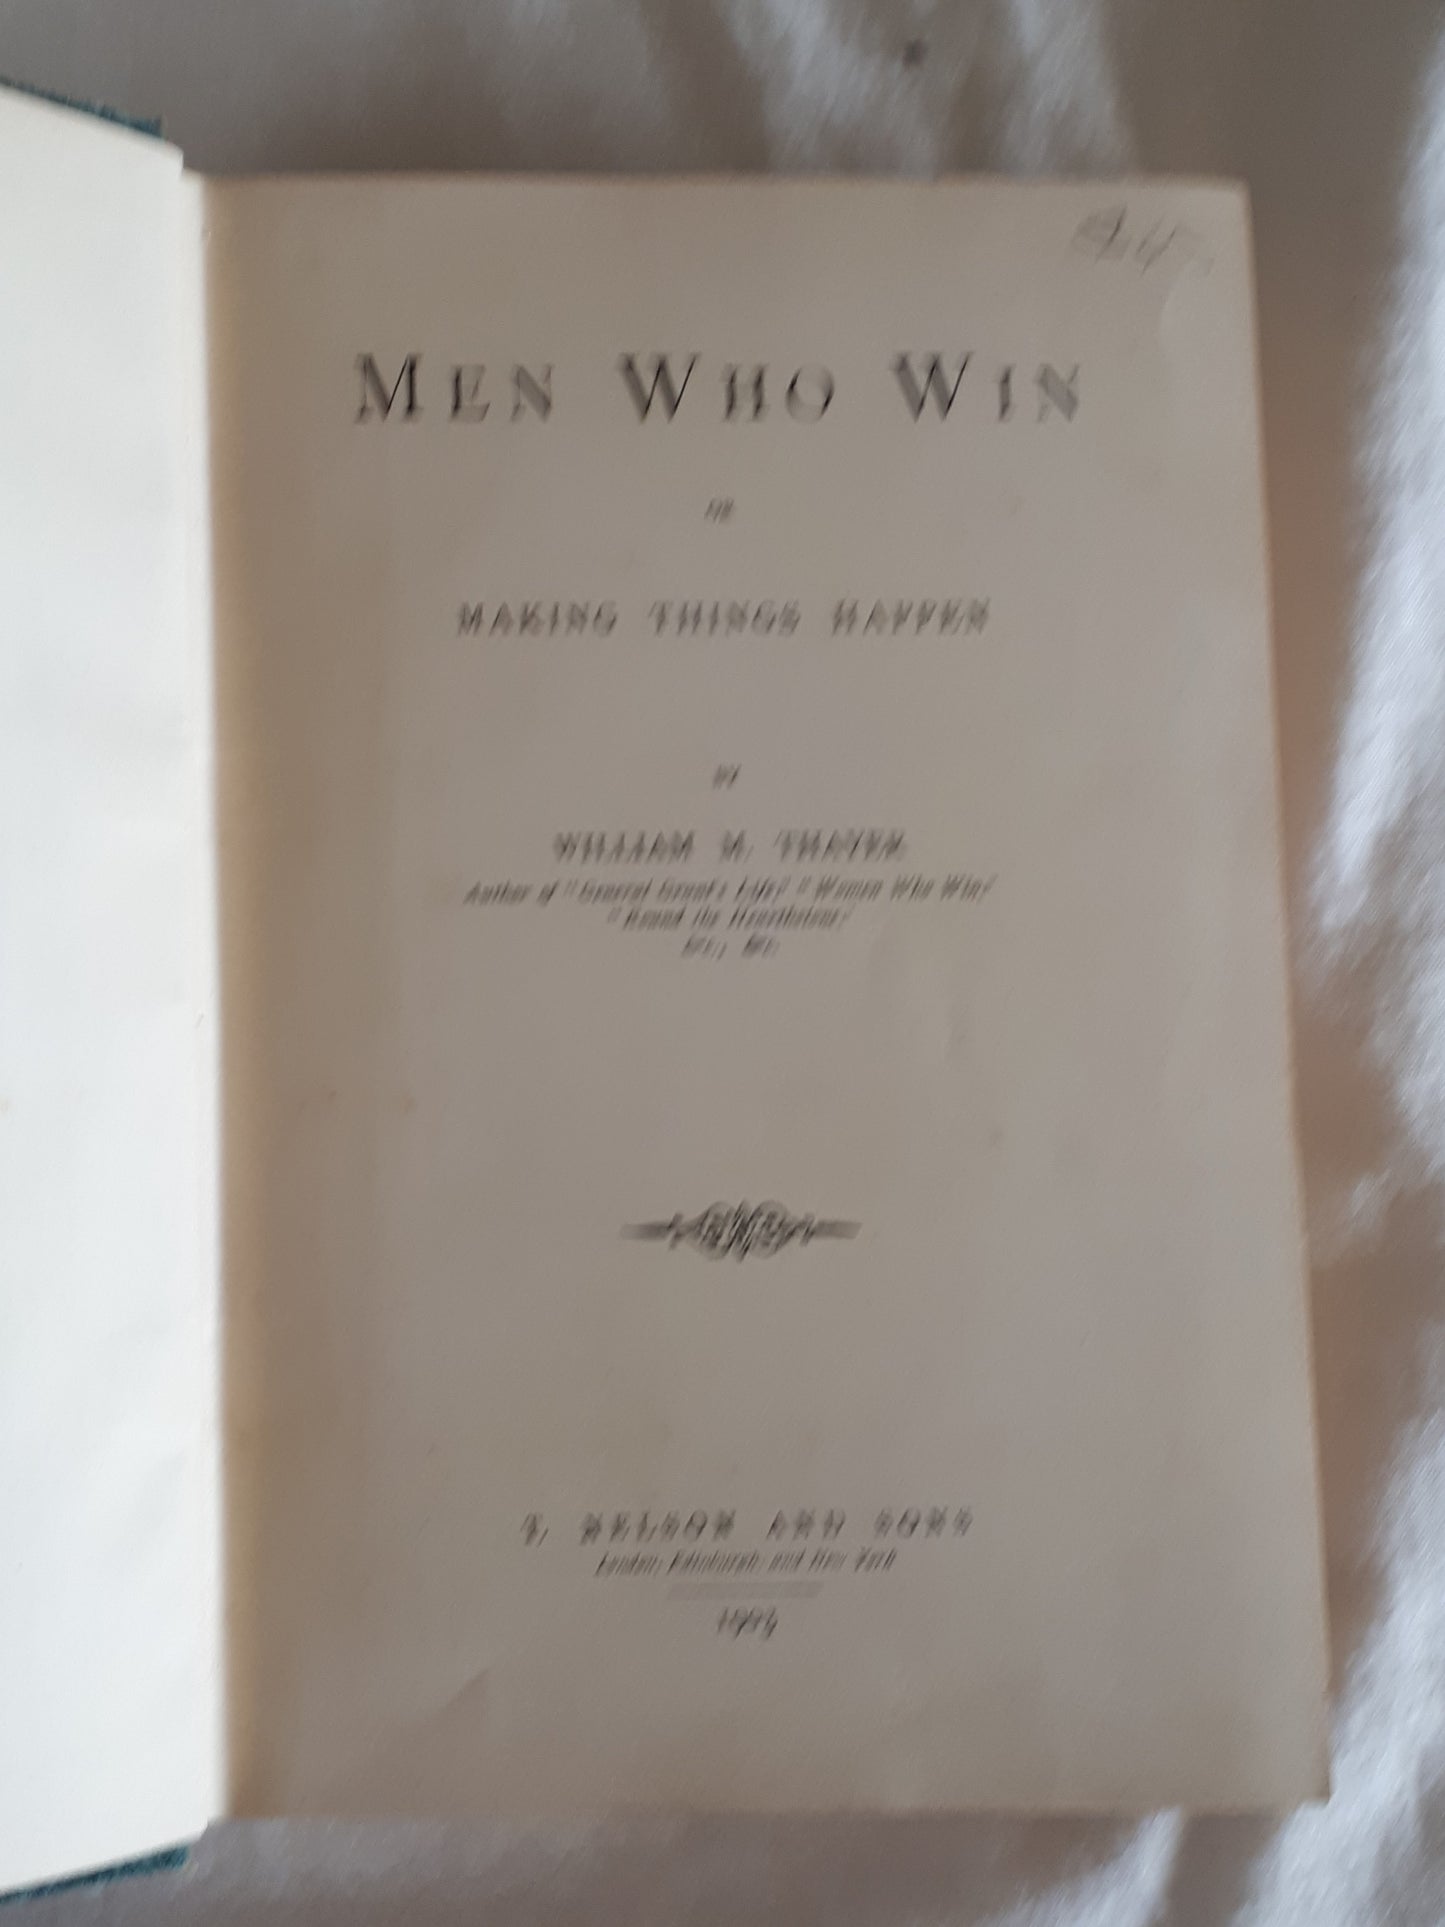 Men Who Win by William M. Thayer